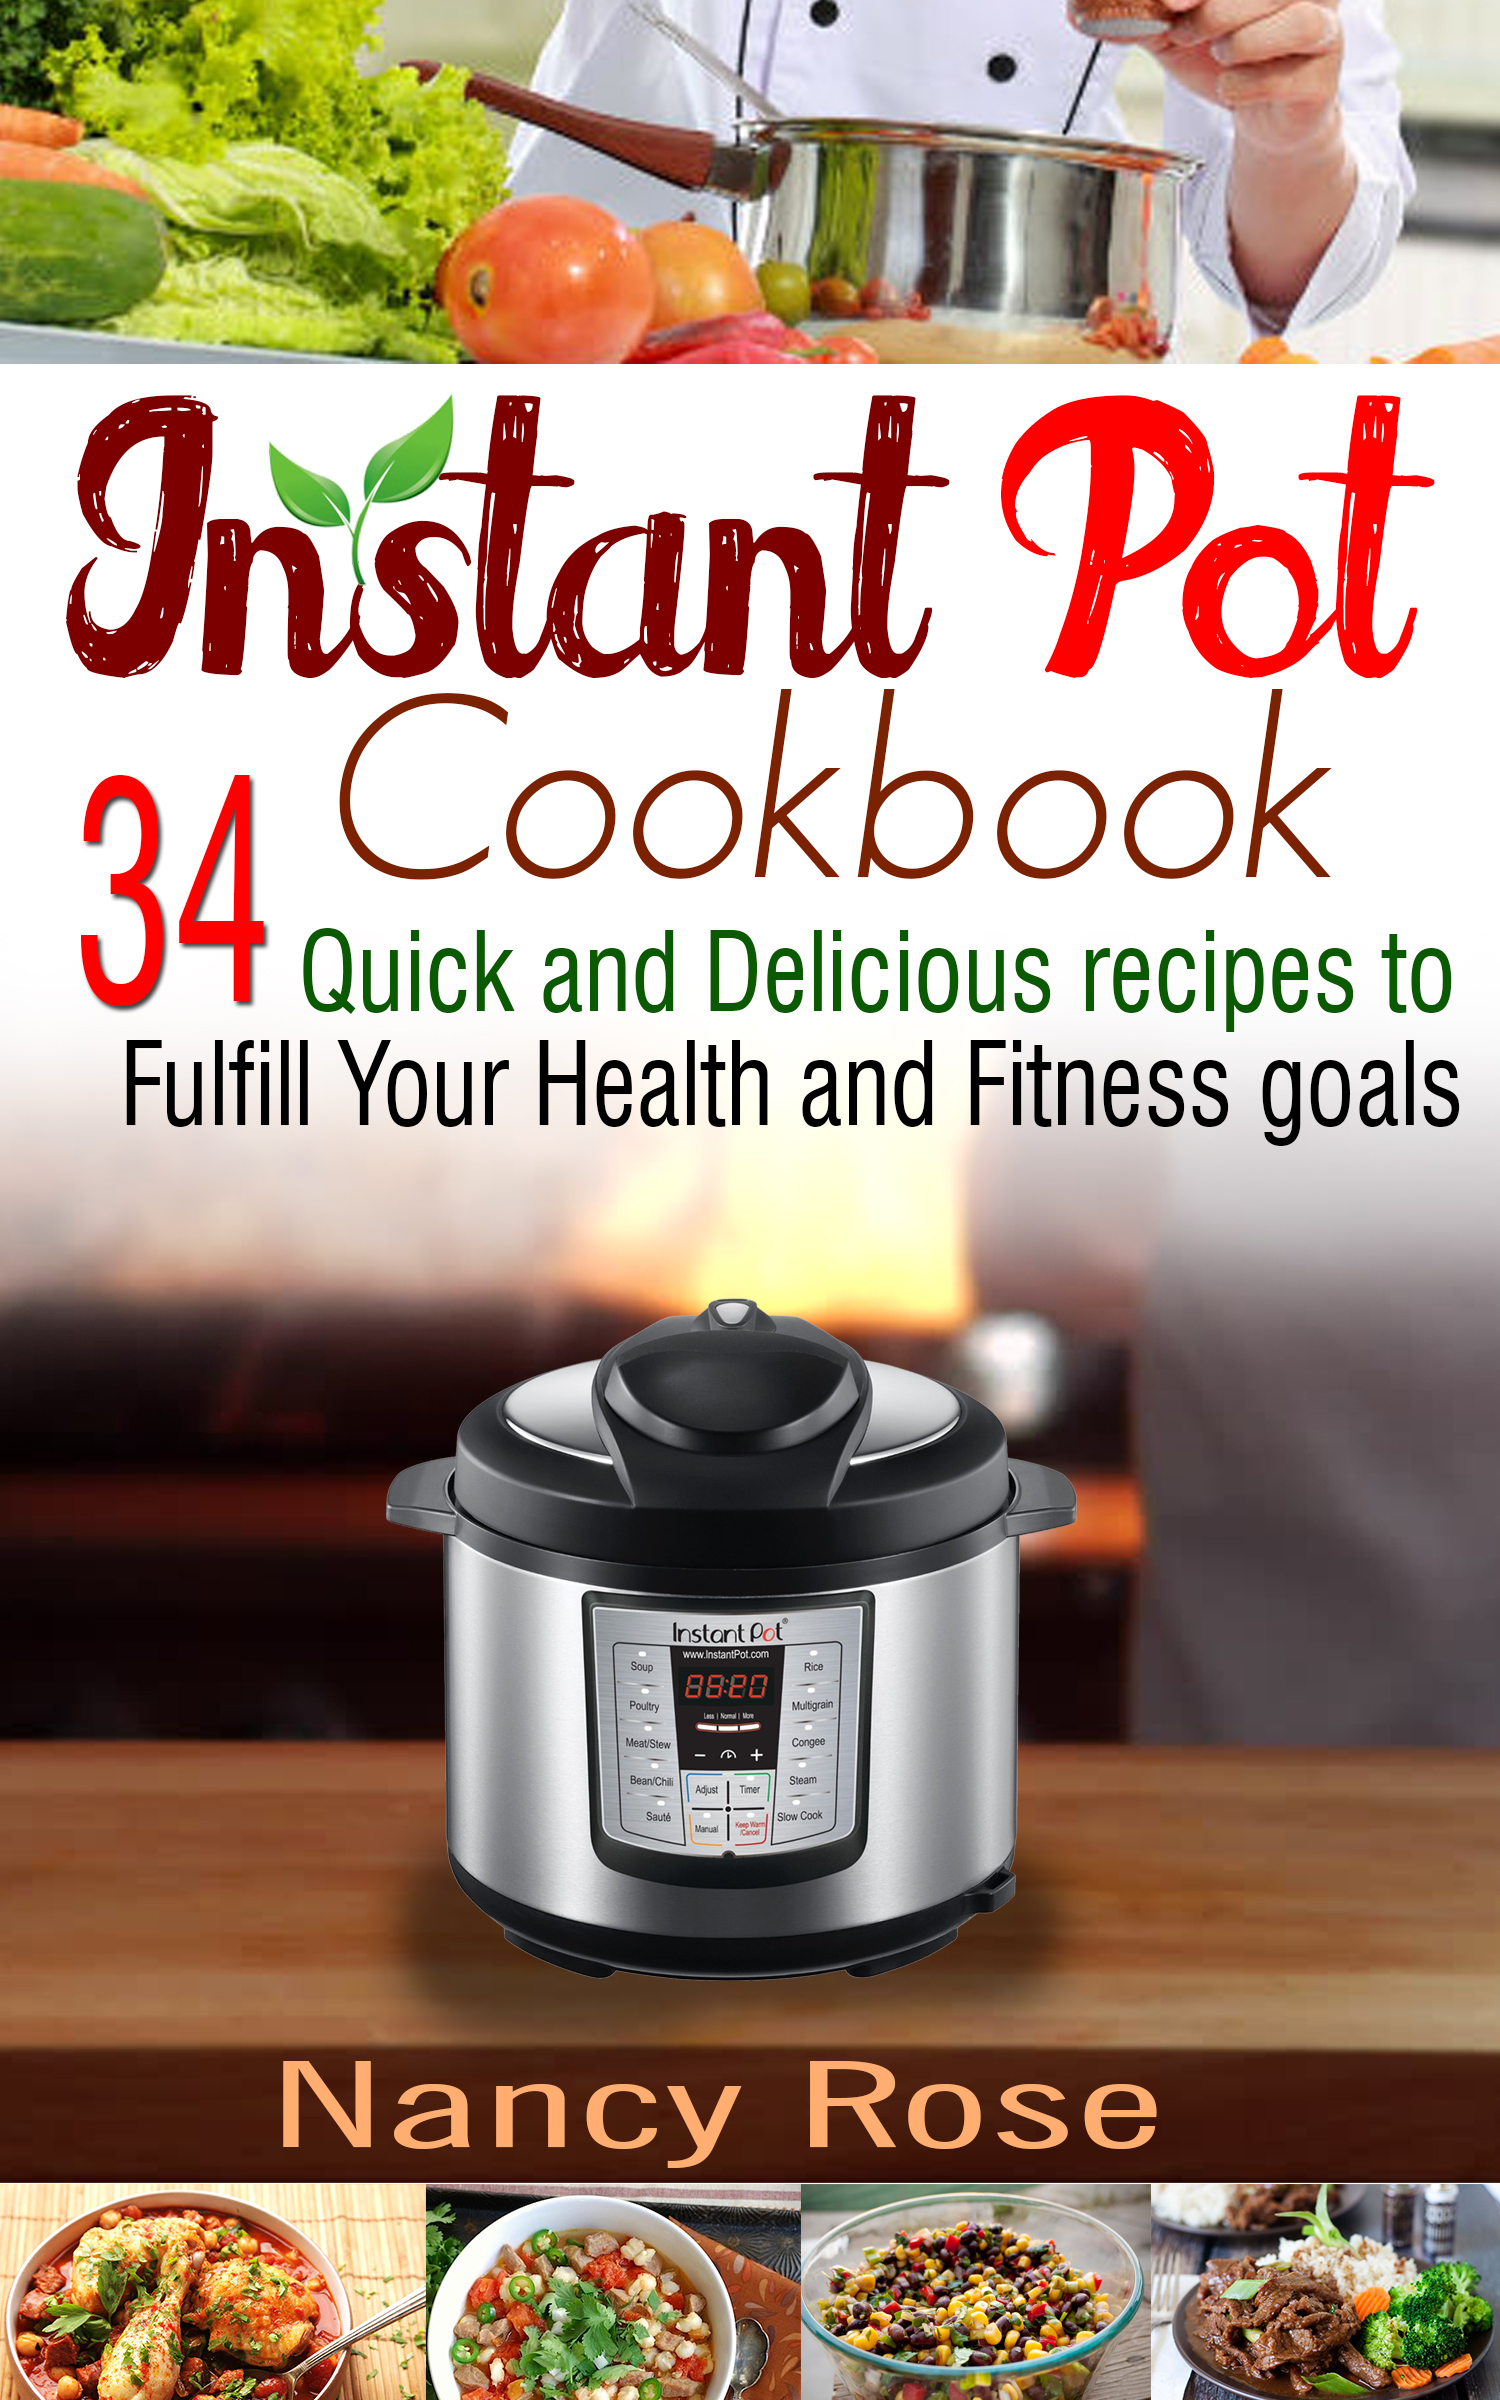 FREE: Instant Pot Cookbook: 34 Quick and Delicious Recipes to Fulfill Your Health and Fitness Goals by Nancy Rose